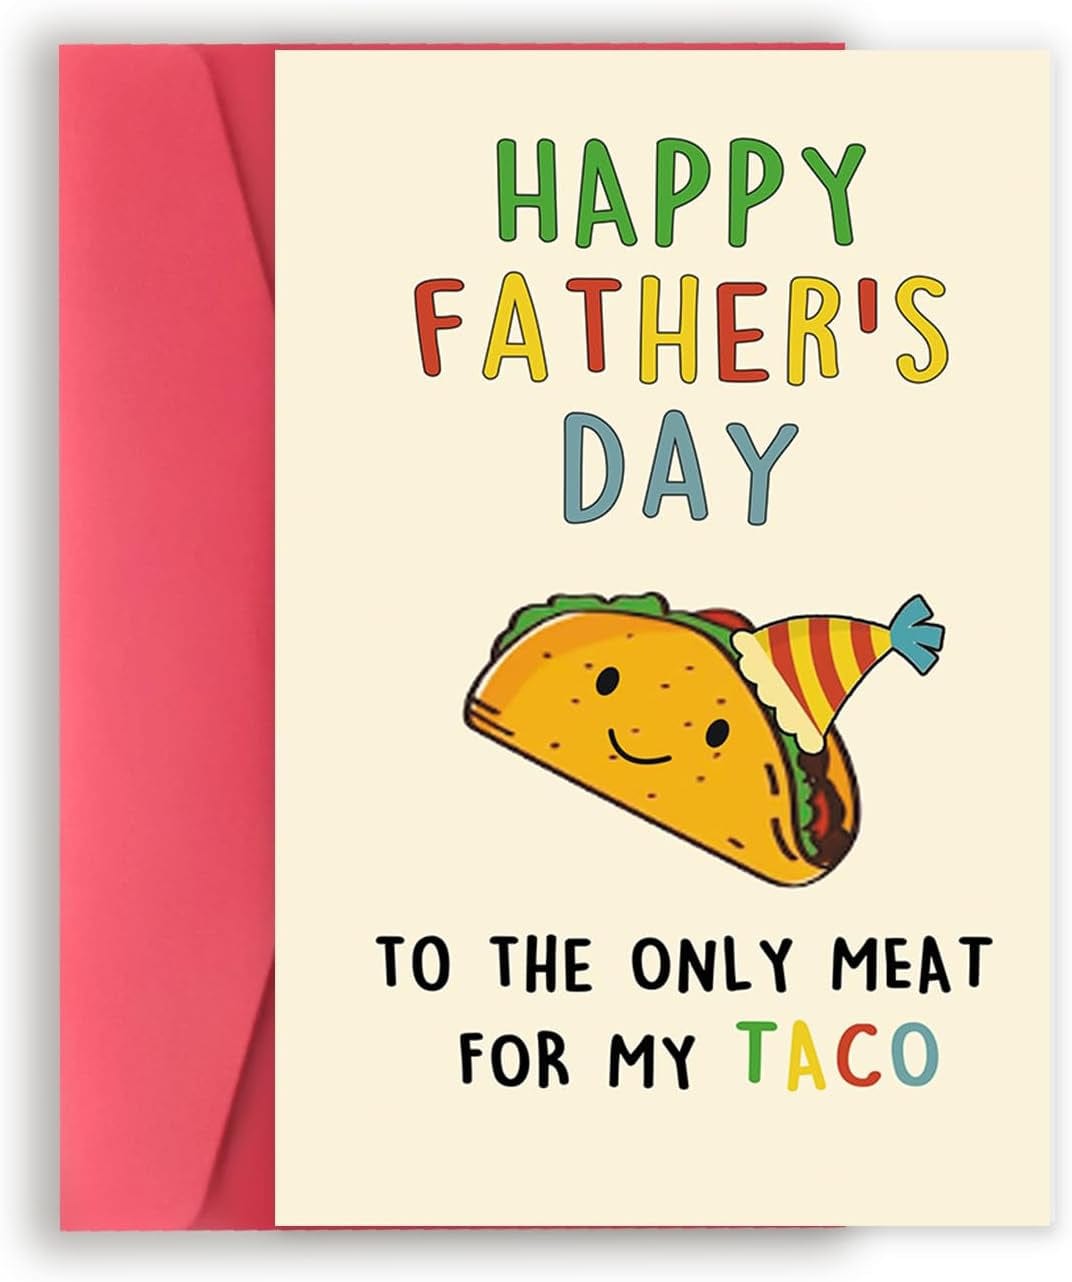 GeckoCustom Lovely Taco Father'S Day Card for Dad, Funny Fathers Day Gift for Husband from Wife, Romantic Father'S Day Card, Happy Father'S Day to the Only Meat for My Taco Taco Dad Card